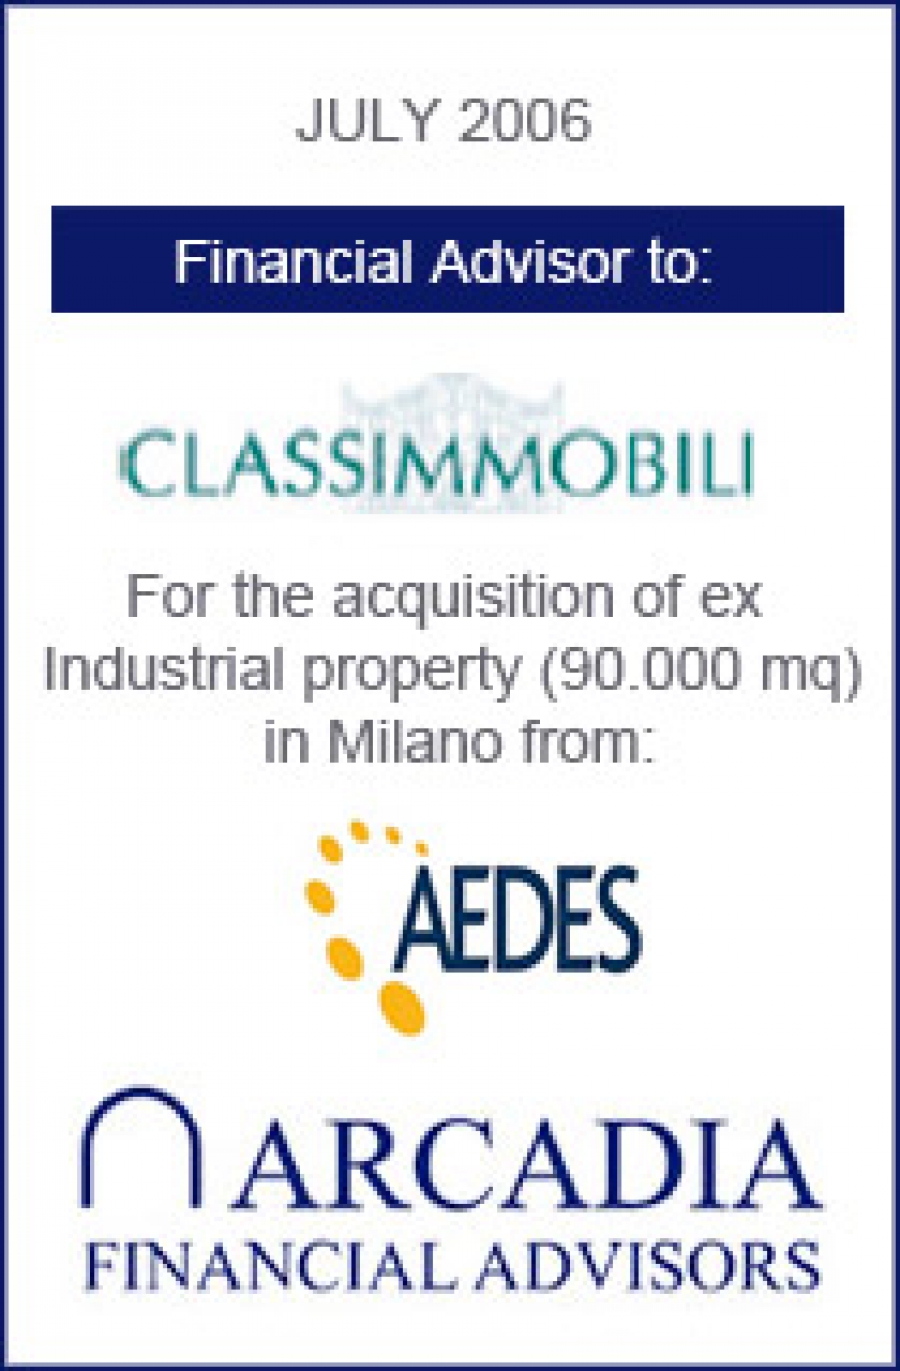 Transaction completed with Classimmobili